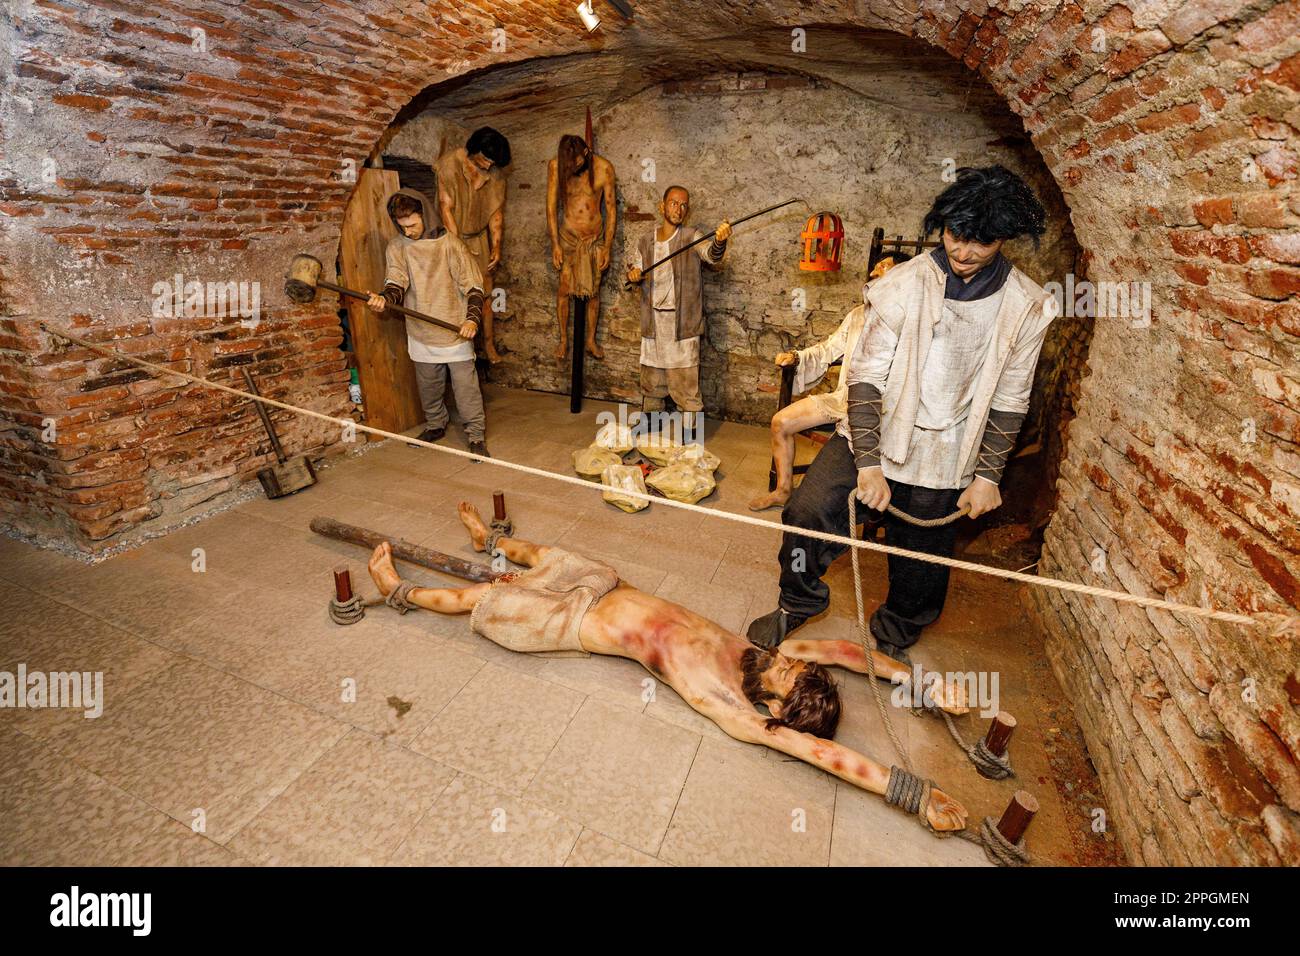 Medieval Torture, The Rack - Stock Image - C044/7883 - Science Photo Library